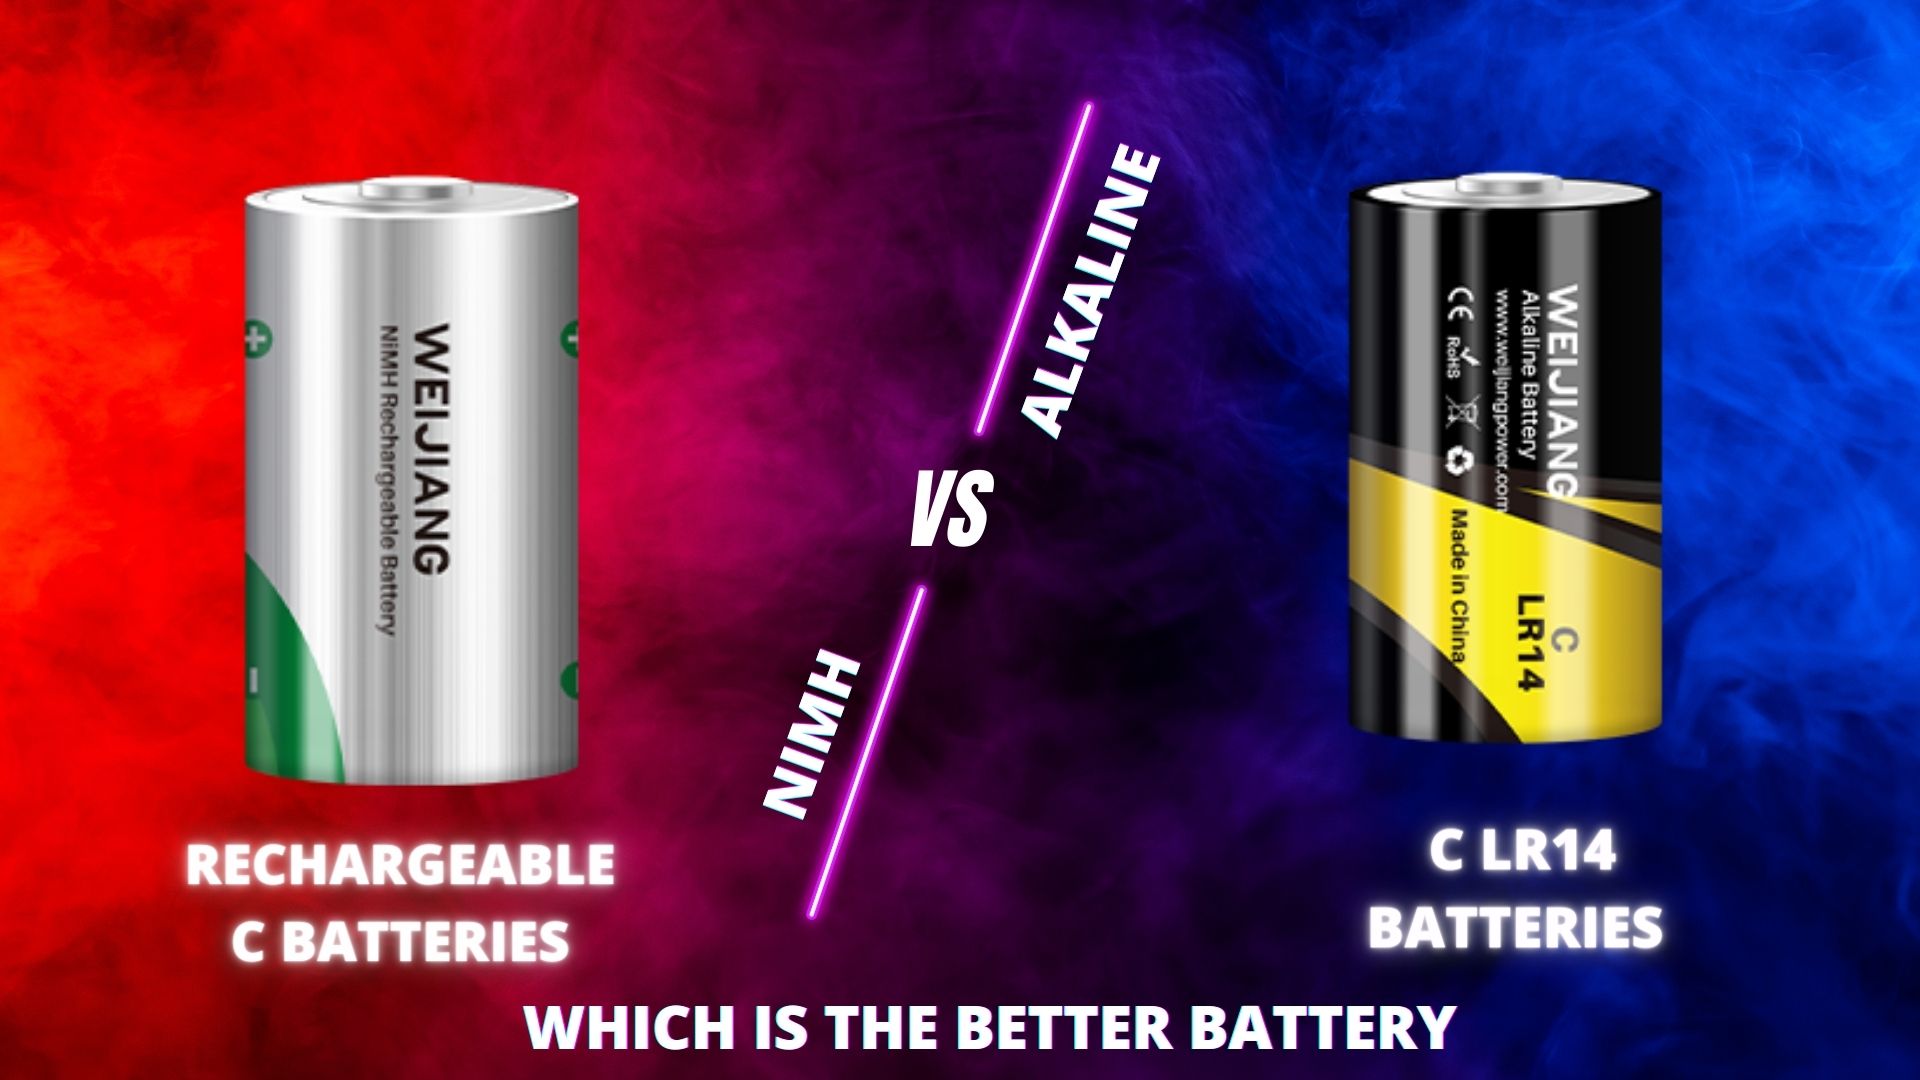 Rechargeable C Batteries vs. Alkaline C LR14 Batteries: Which is the Best C Battery for Your Business? | WEIJIANG